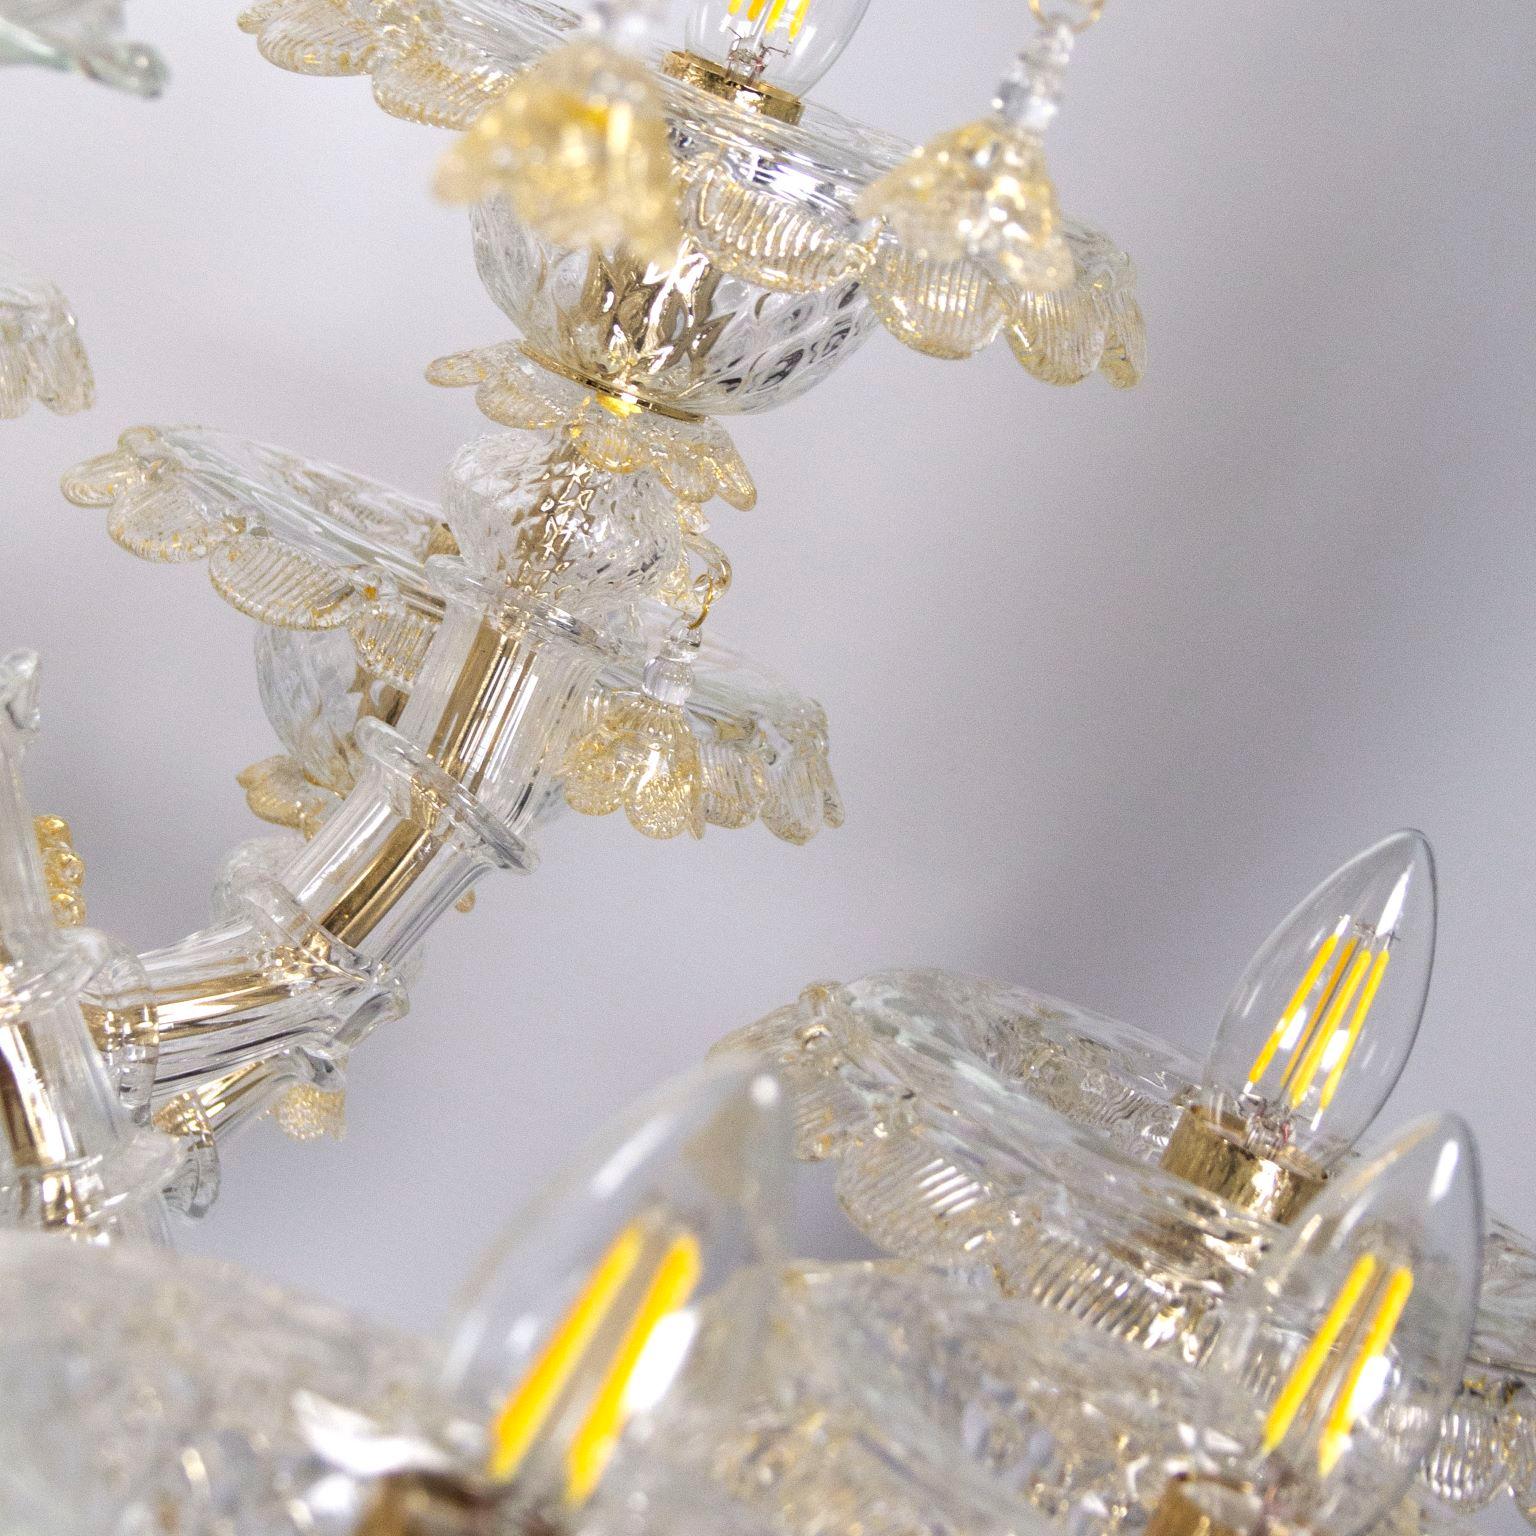 Luxury rezzonico chandelier 12+3 arms, crystal glass and gold details by Multiforme.
This chandelier evokes the splendour of the past centuries. It is an evergreen model, a Classic product manufactured by our skilled masters glass-worker.
The